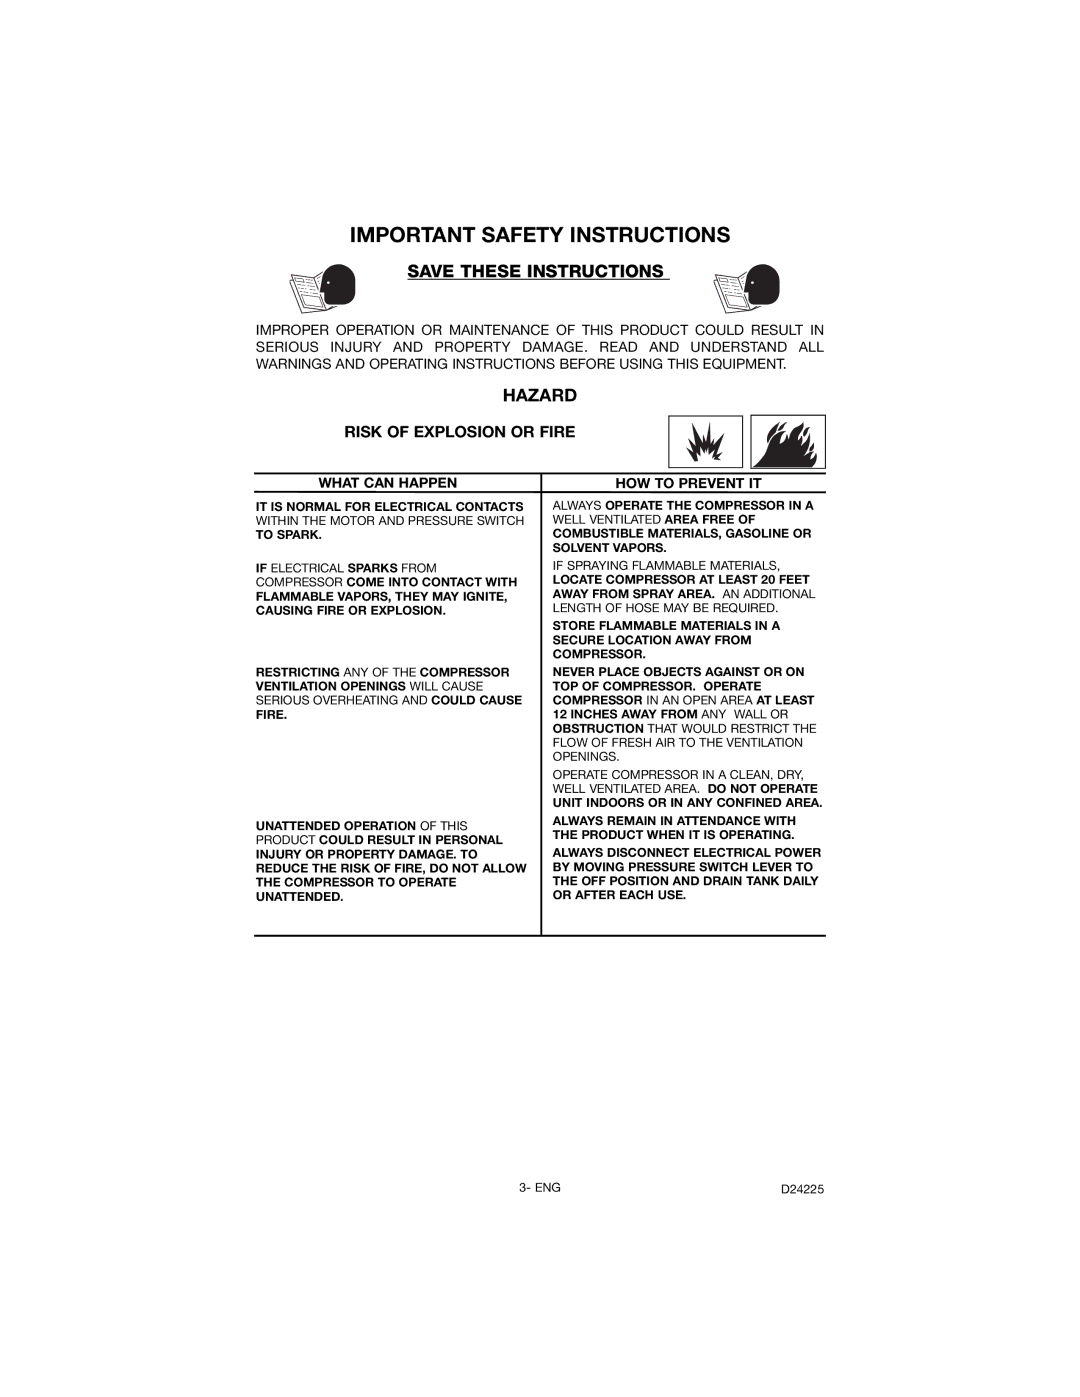 Porter-Cable D24225-049-2 instruction manual Hazard, Risk of Explosion or Fire 